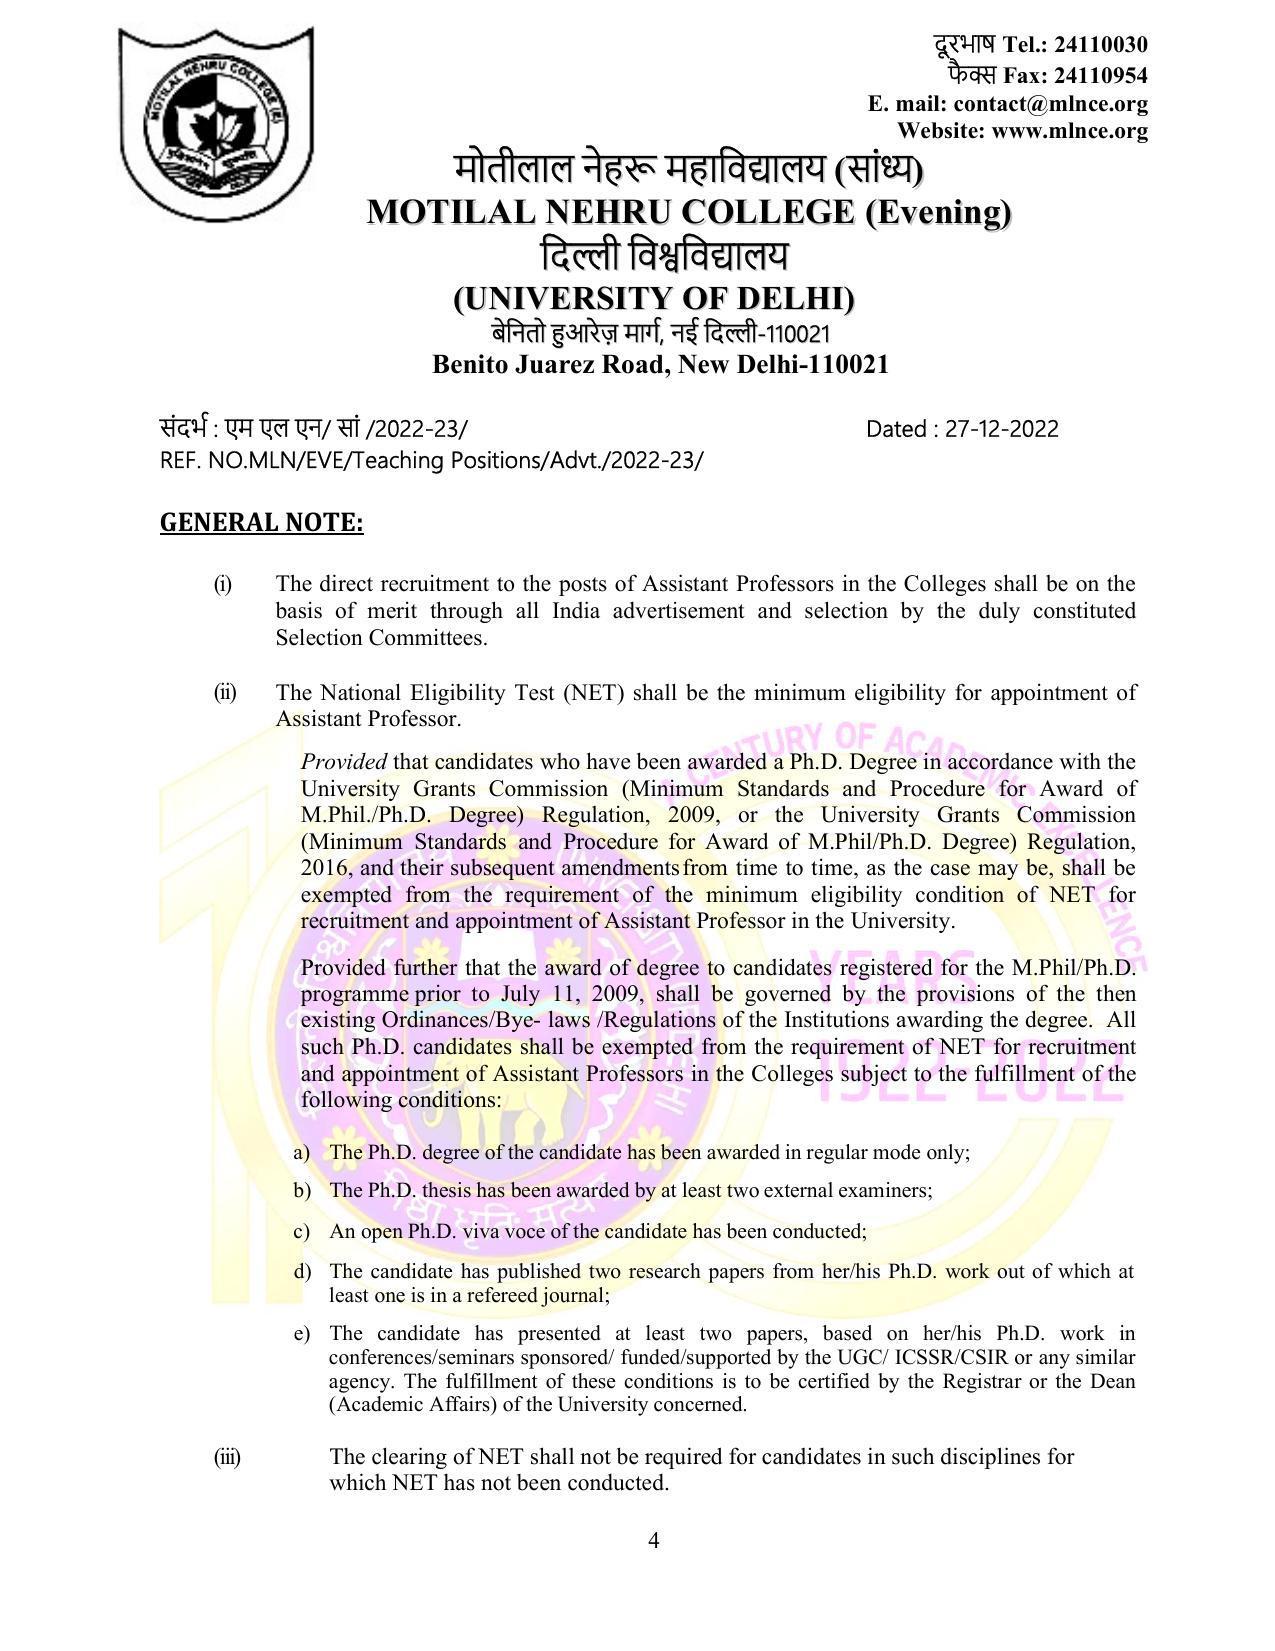 Motilal Nehru College (Evening) Invites Application for 75 Assistant Professor Recruitment 2022 - Page 13